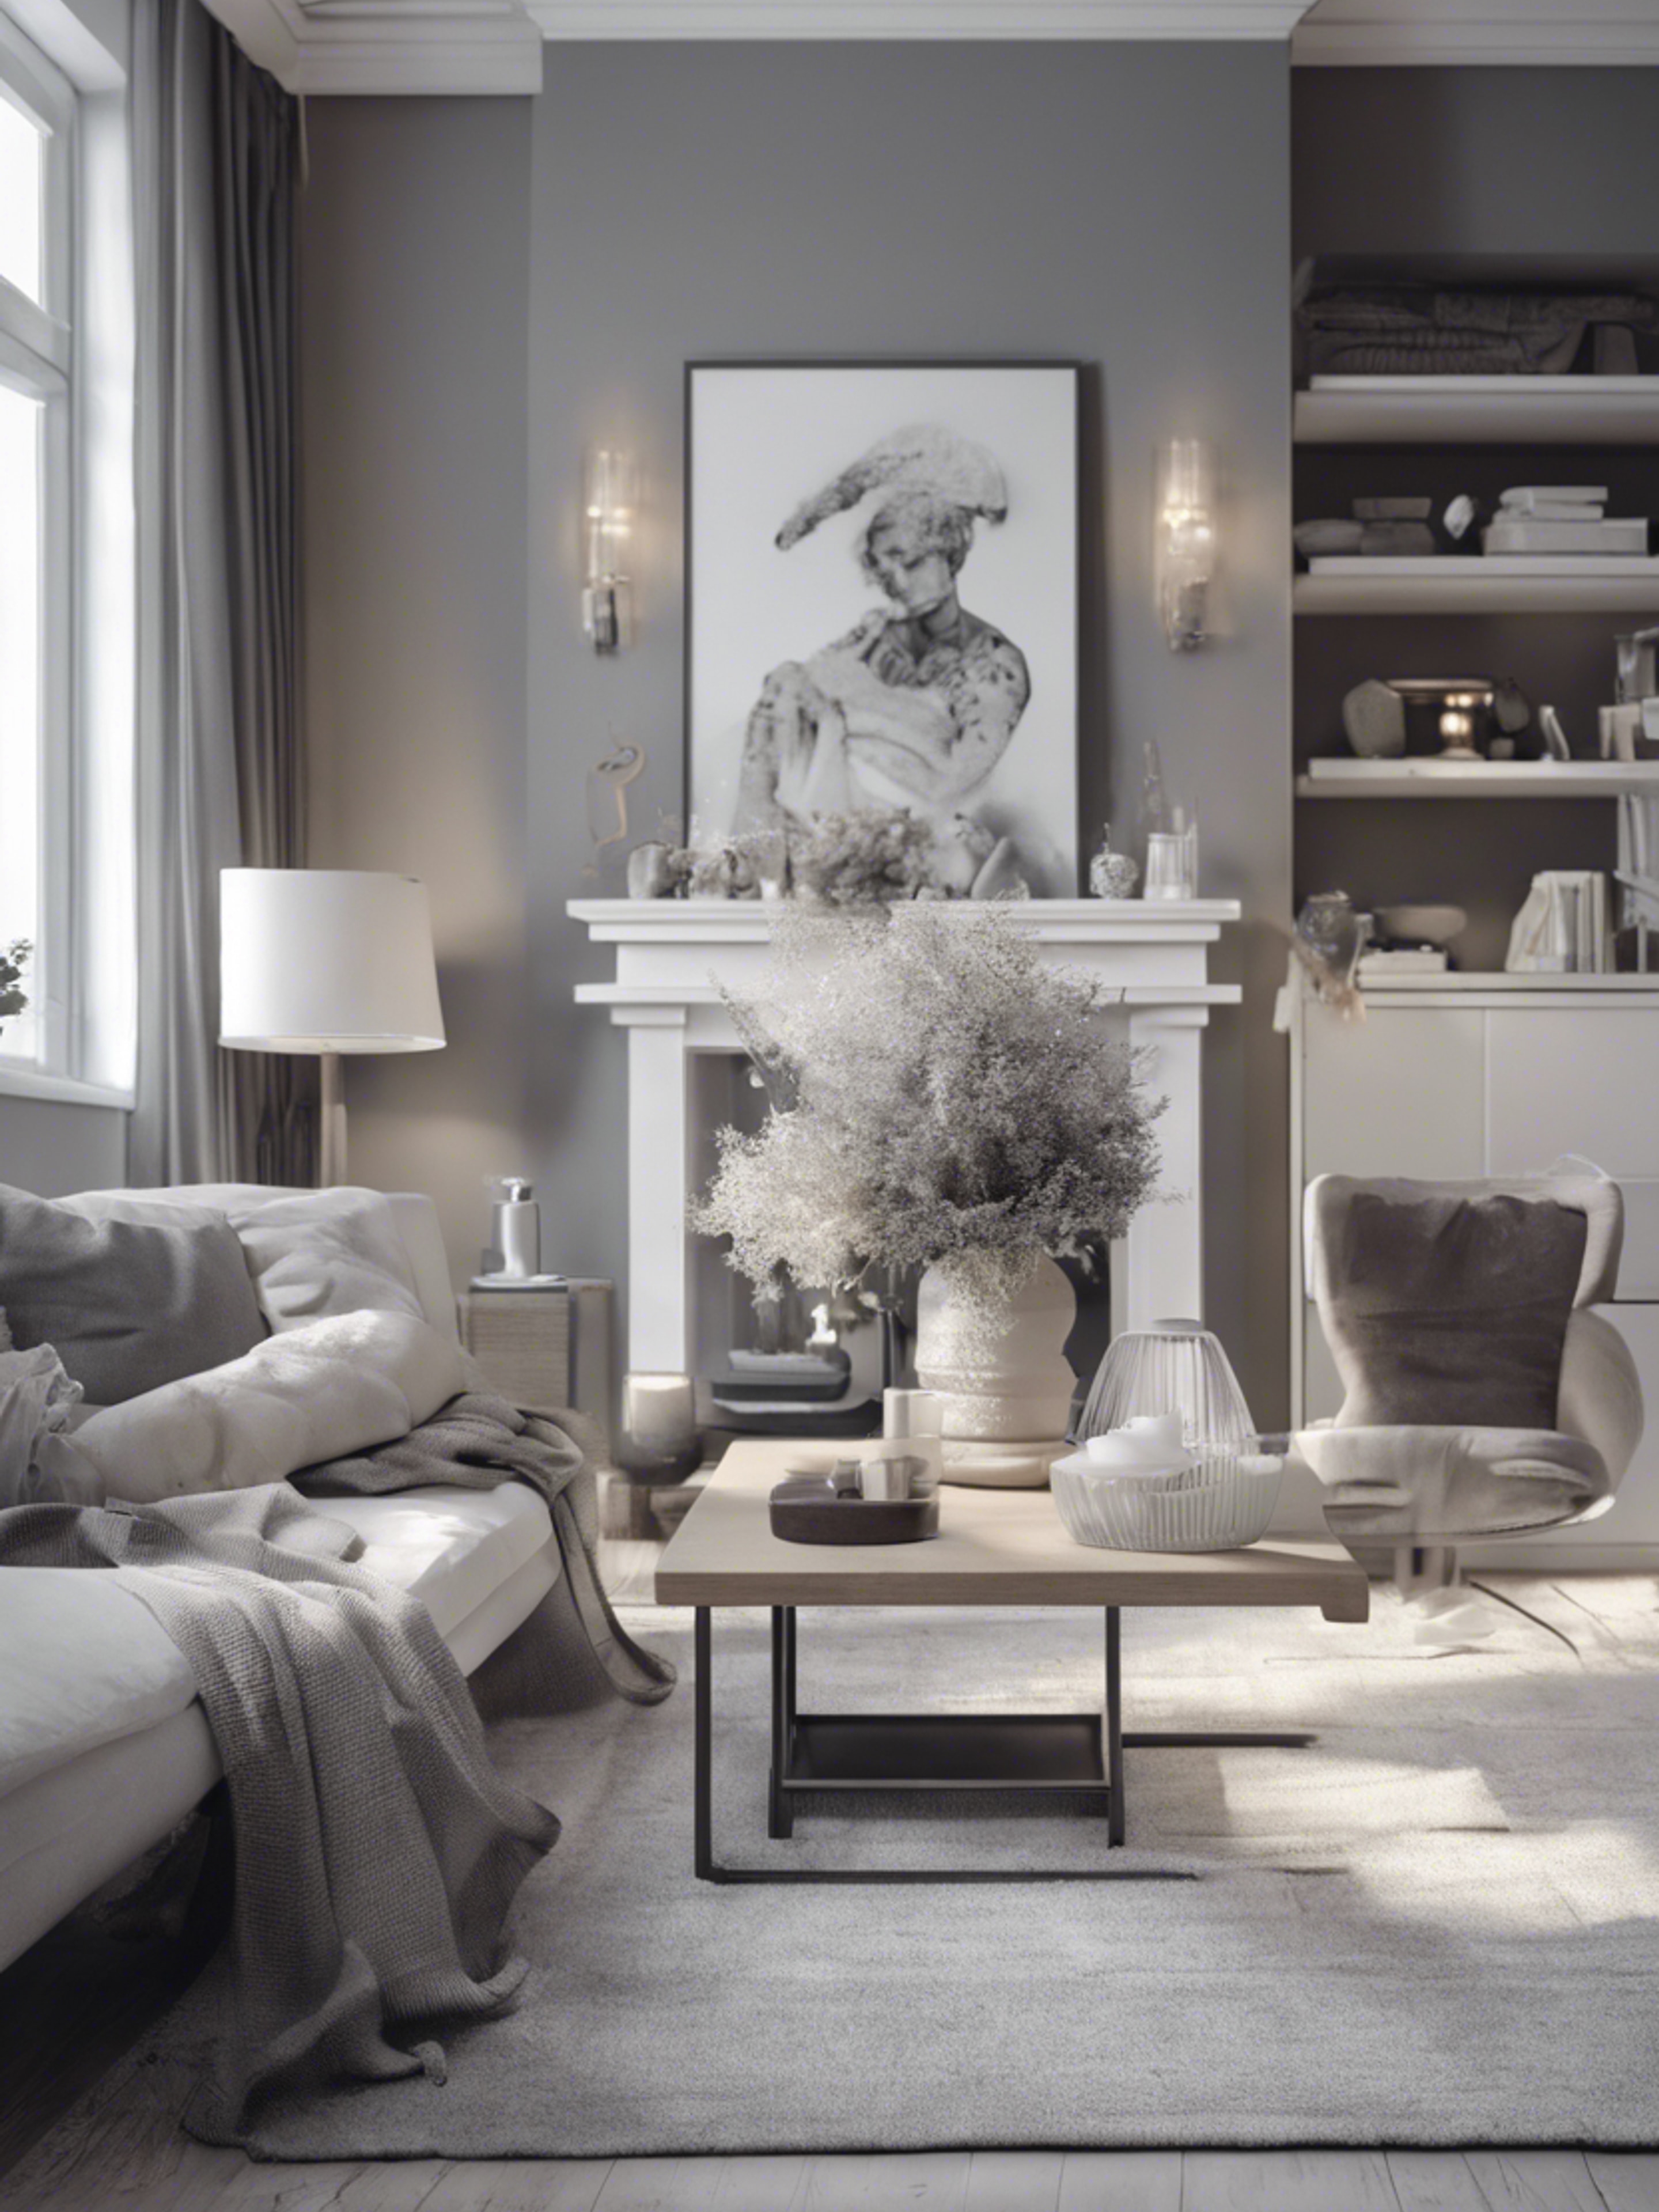 A classic interior design of a living room in neutral gray and white tones. Валлпапер[b4f6eac2faba4219b360]